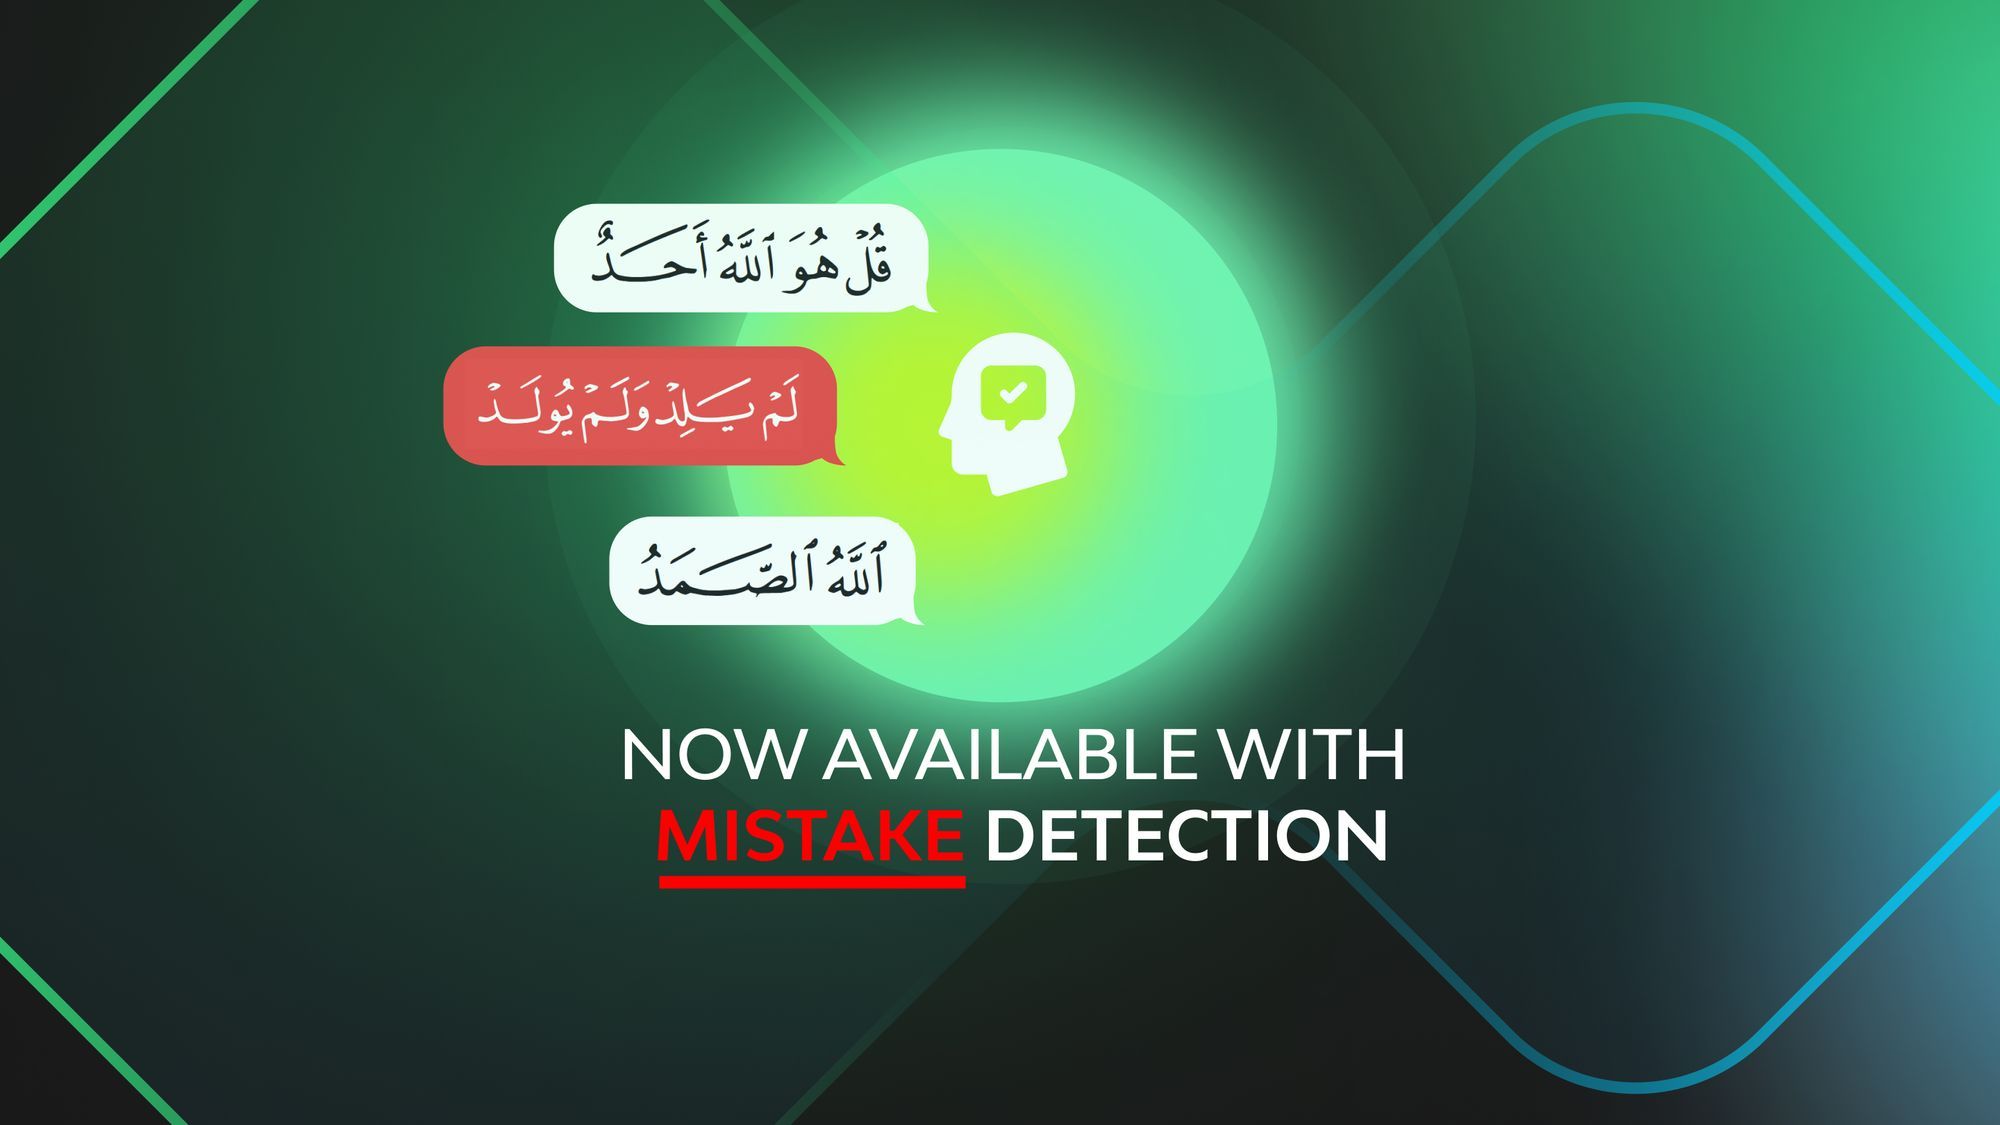 Introducing Mistake Detection